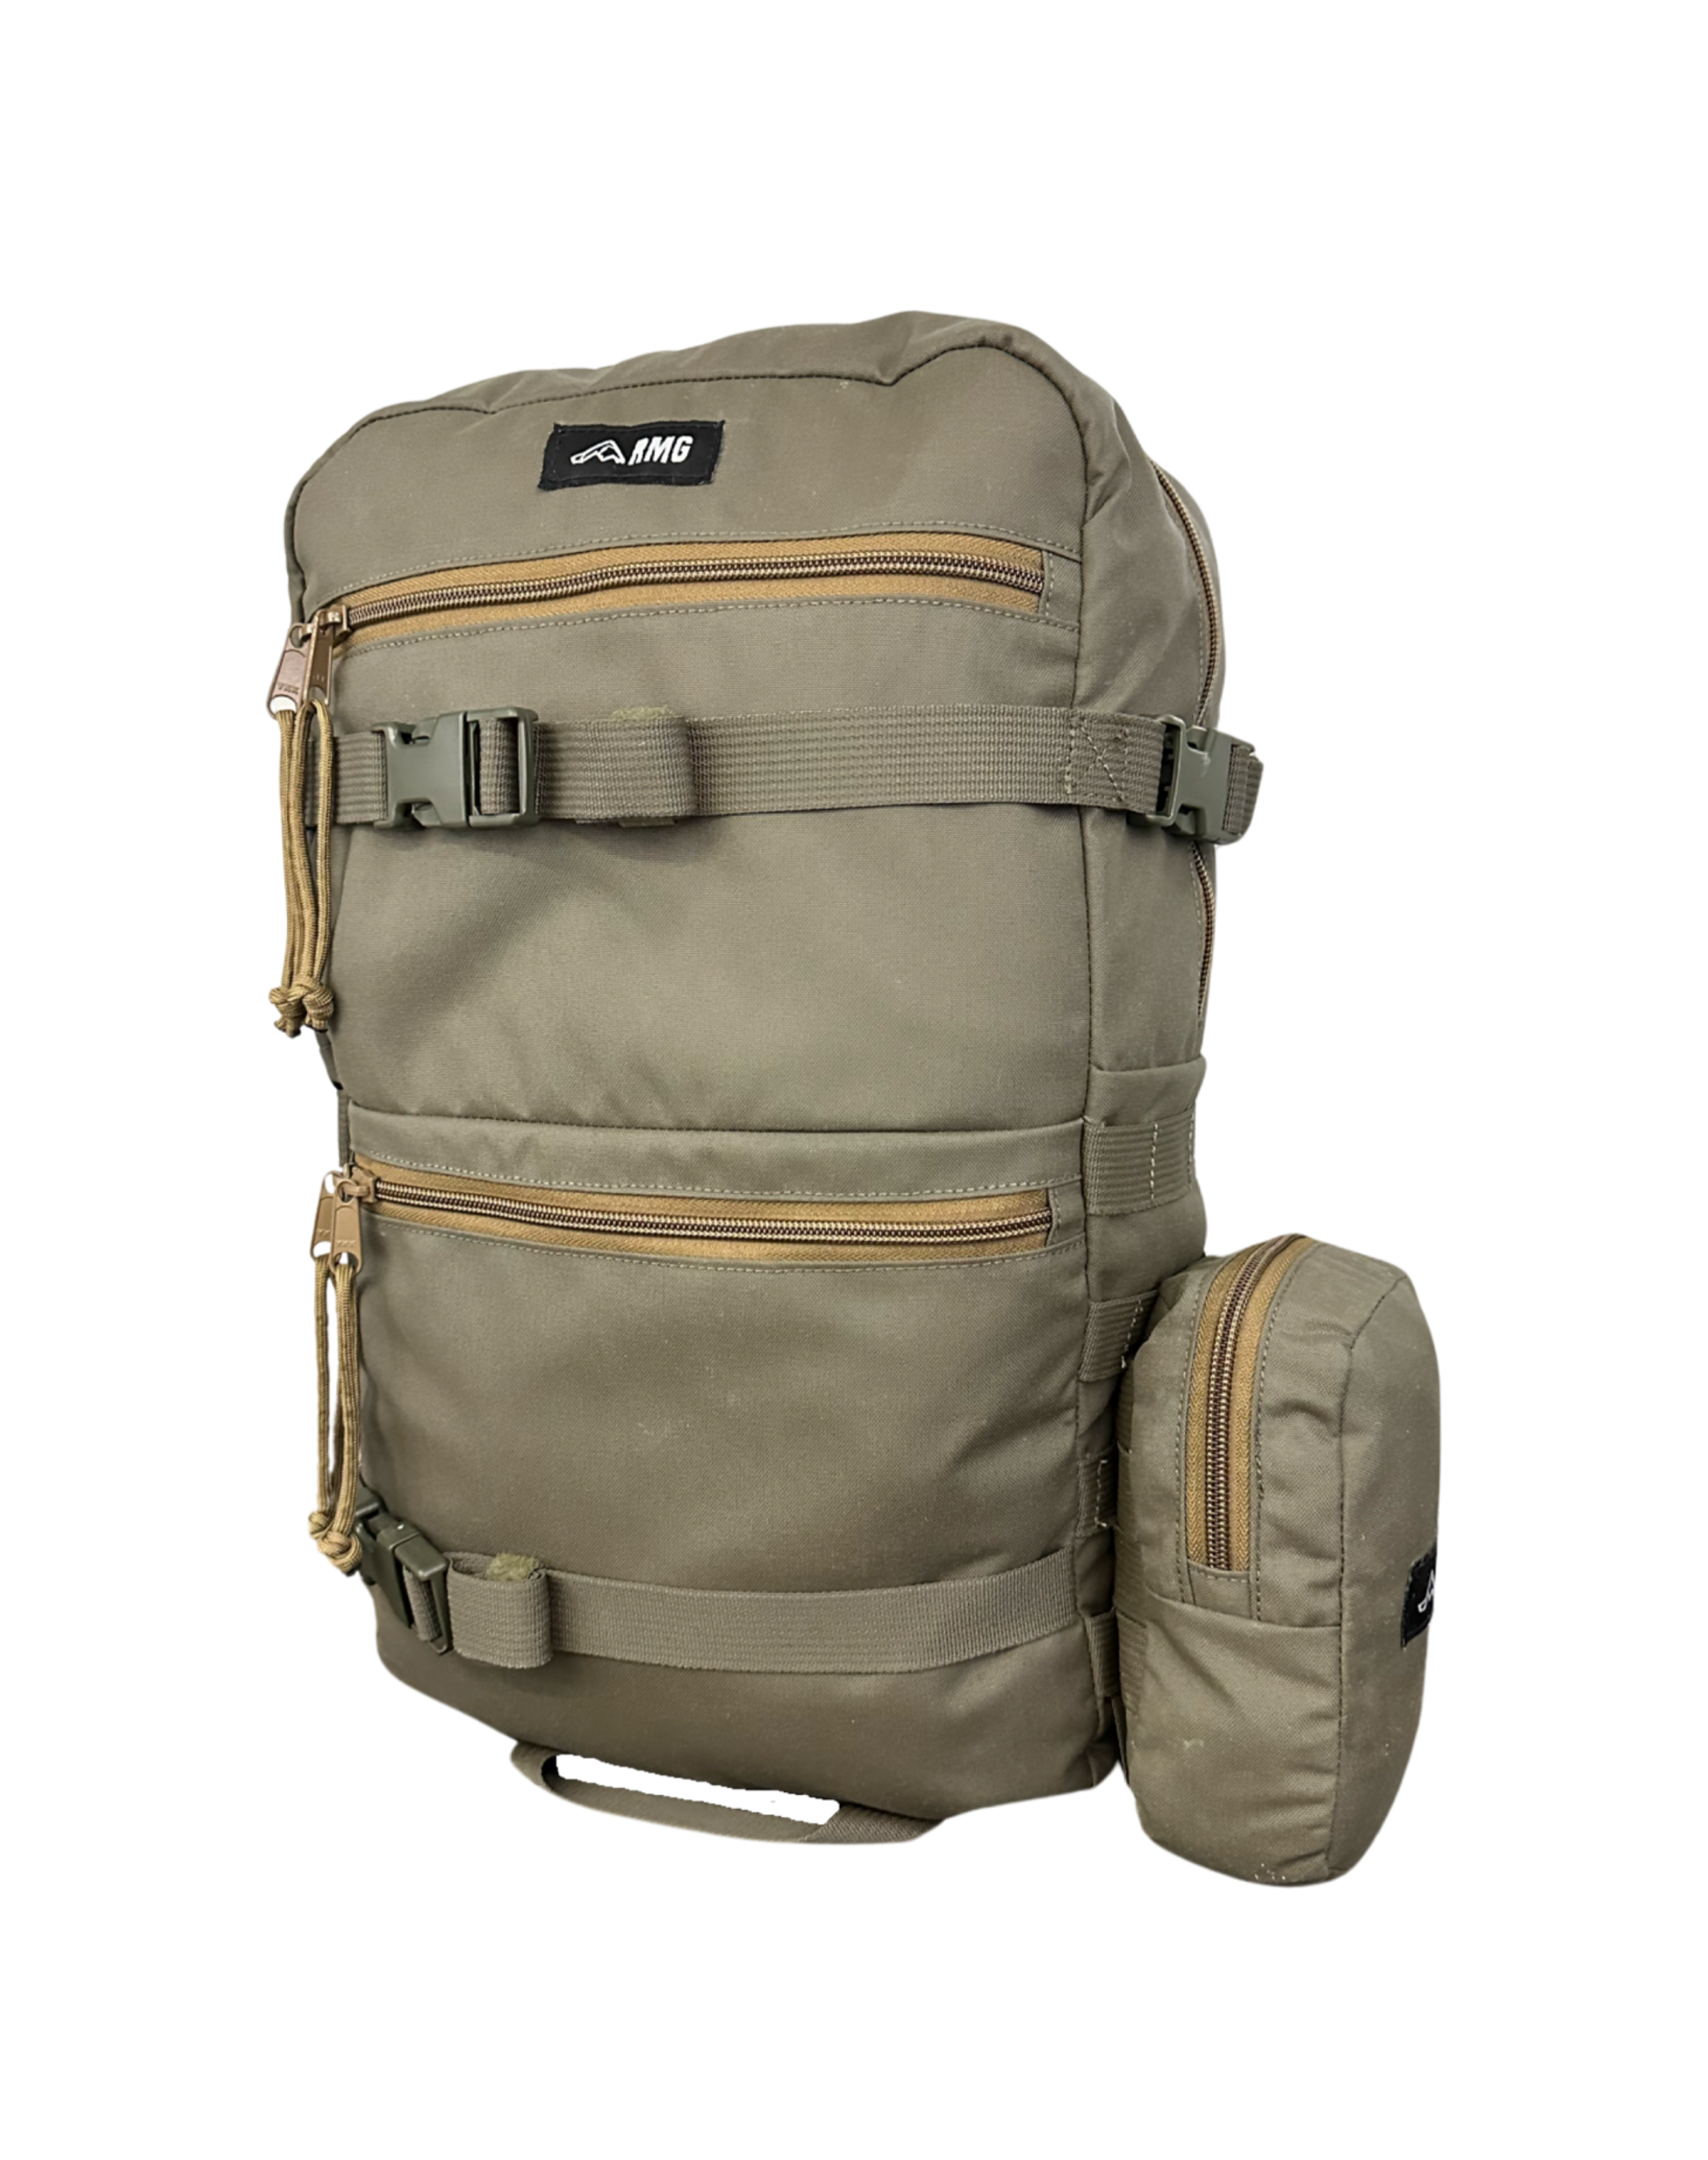 Modular pouch attached to backpack Ranger green